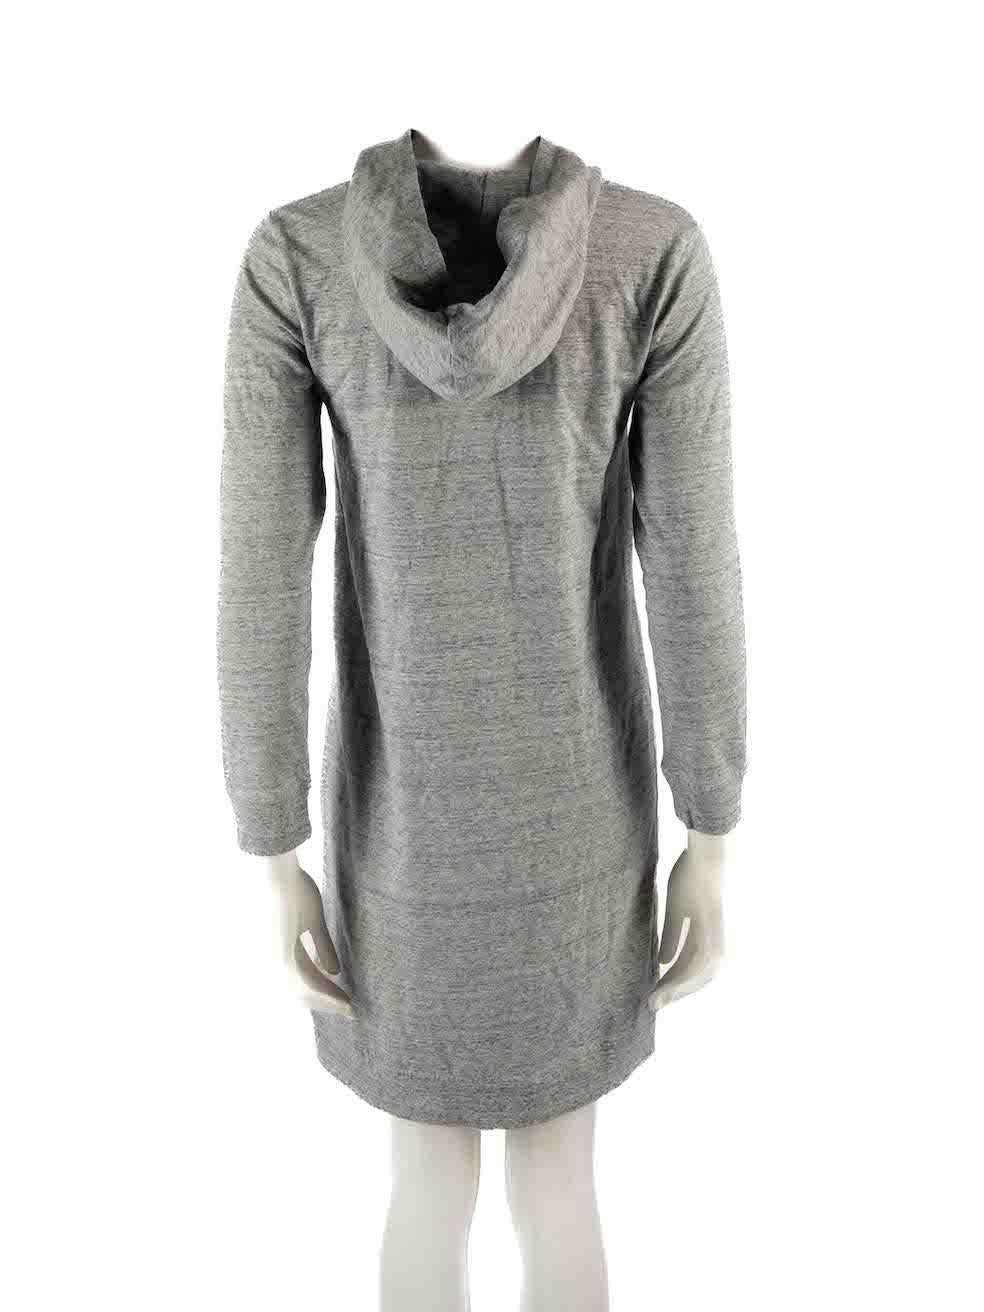 A.P.C. Grey Logo Hooded Sweater Dress Size S In New Condition For Sale In London, GB